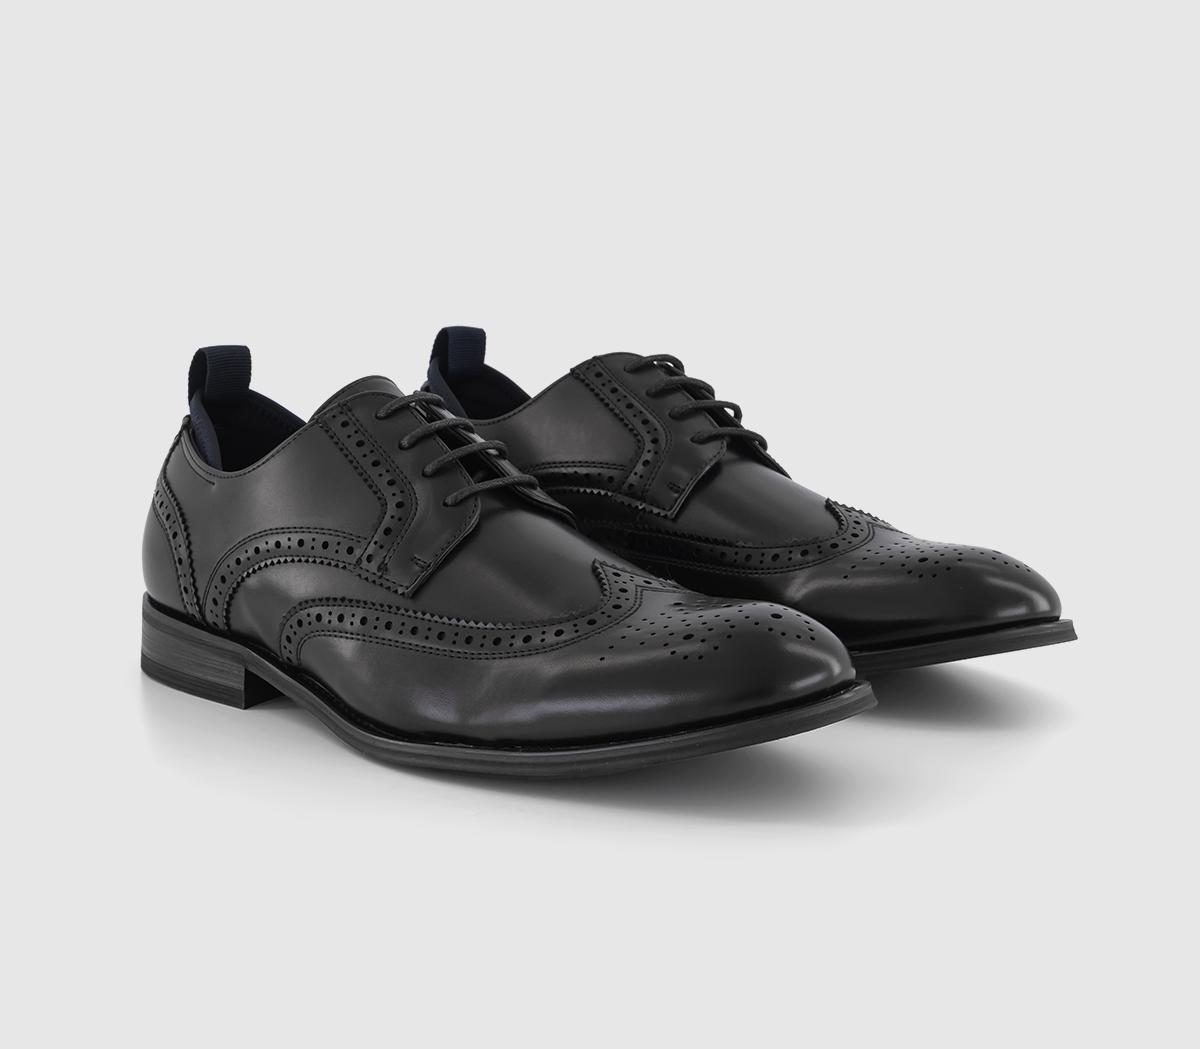 OFFICE Mens Montgomery Brogue Derby Shoes Black, 11